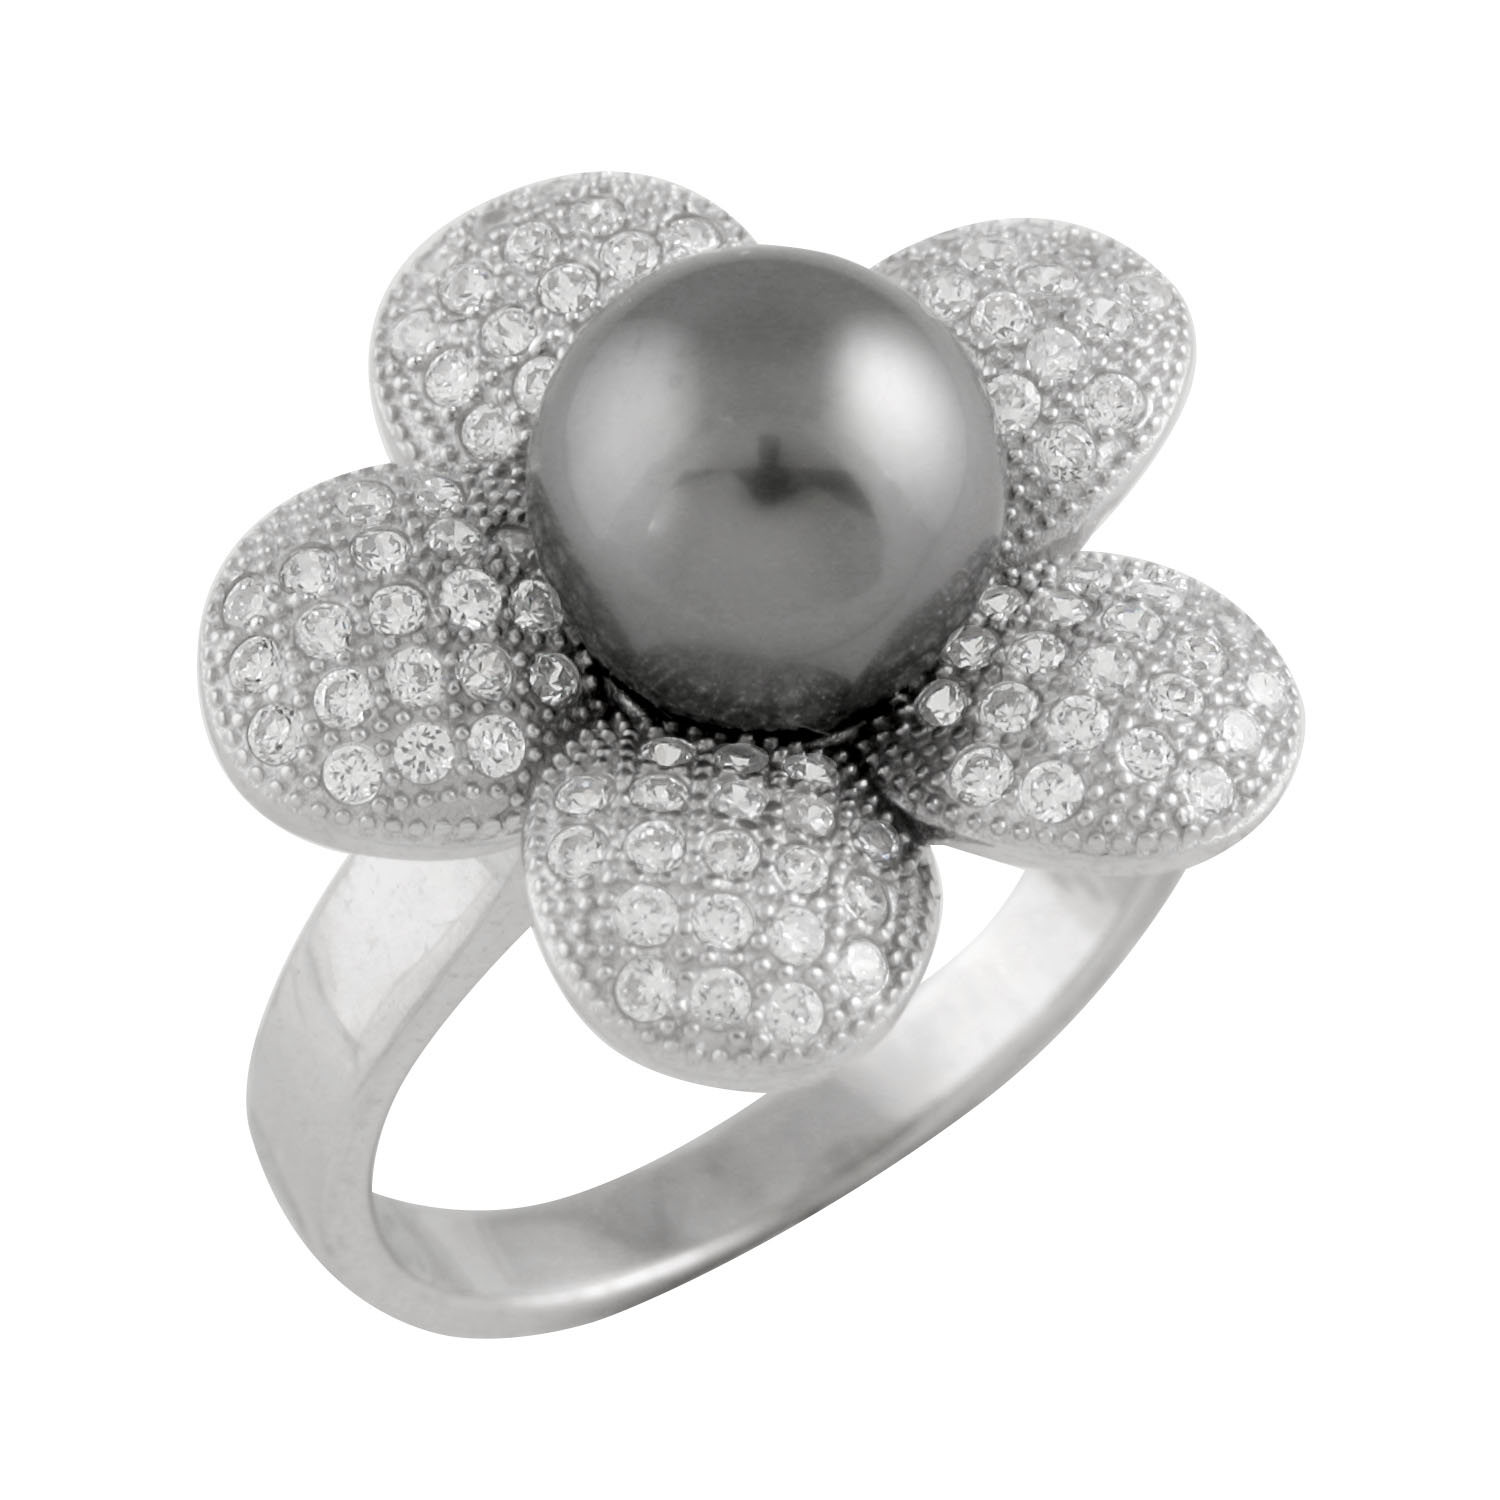 New Sterling silver ring with tahitian pearl